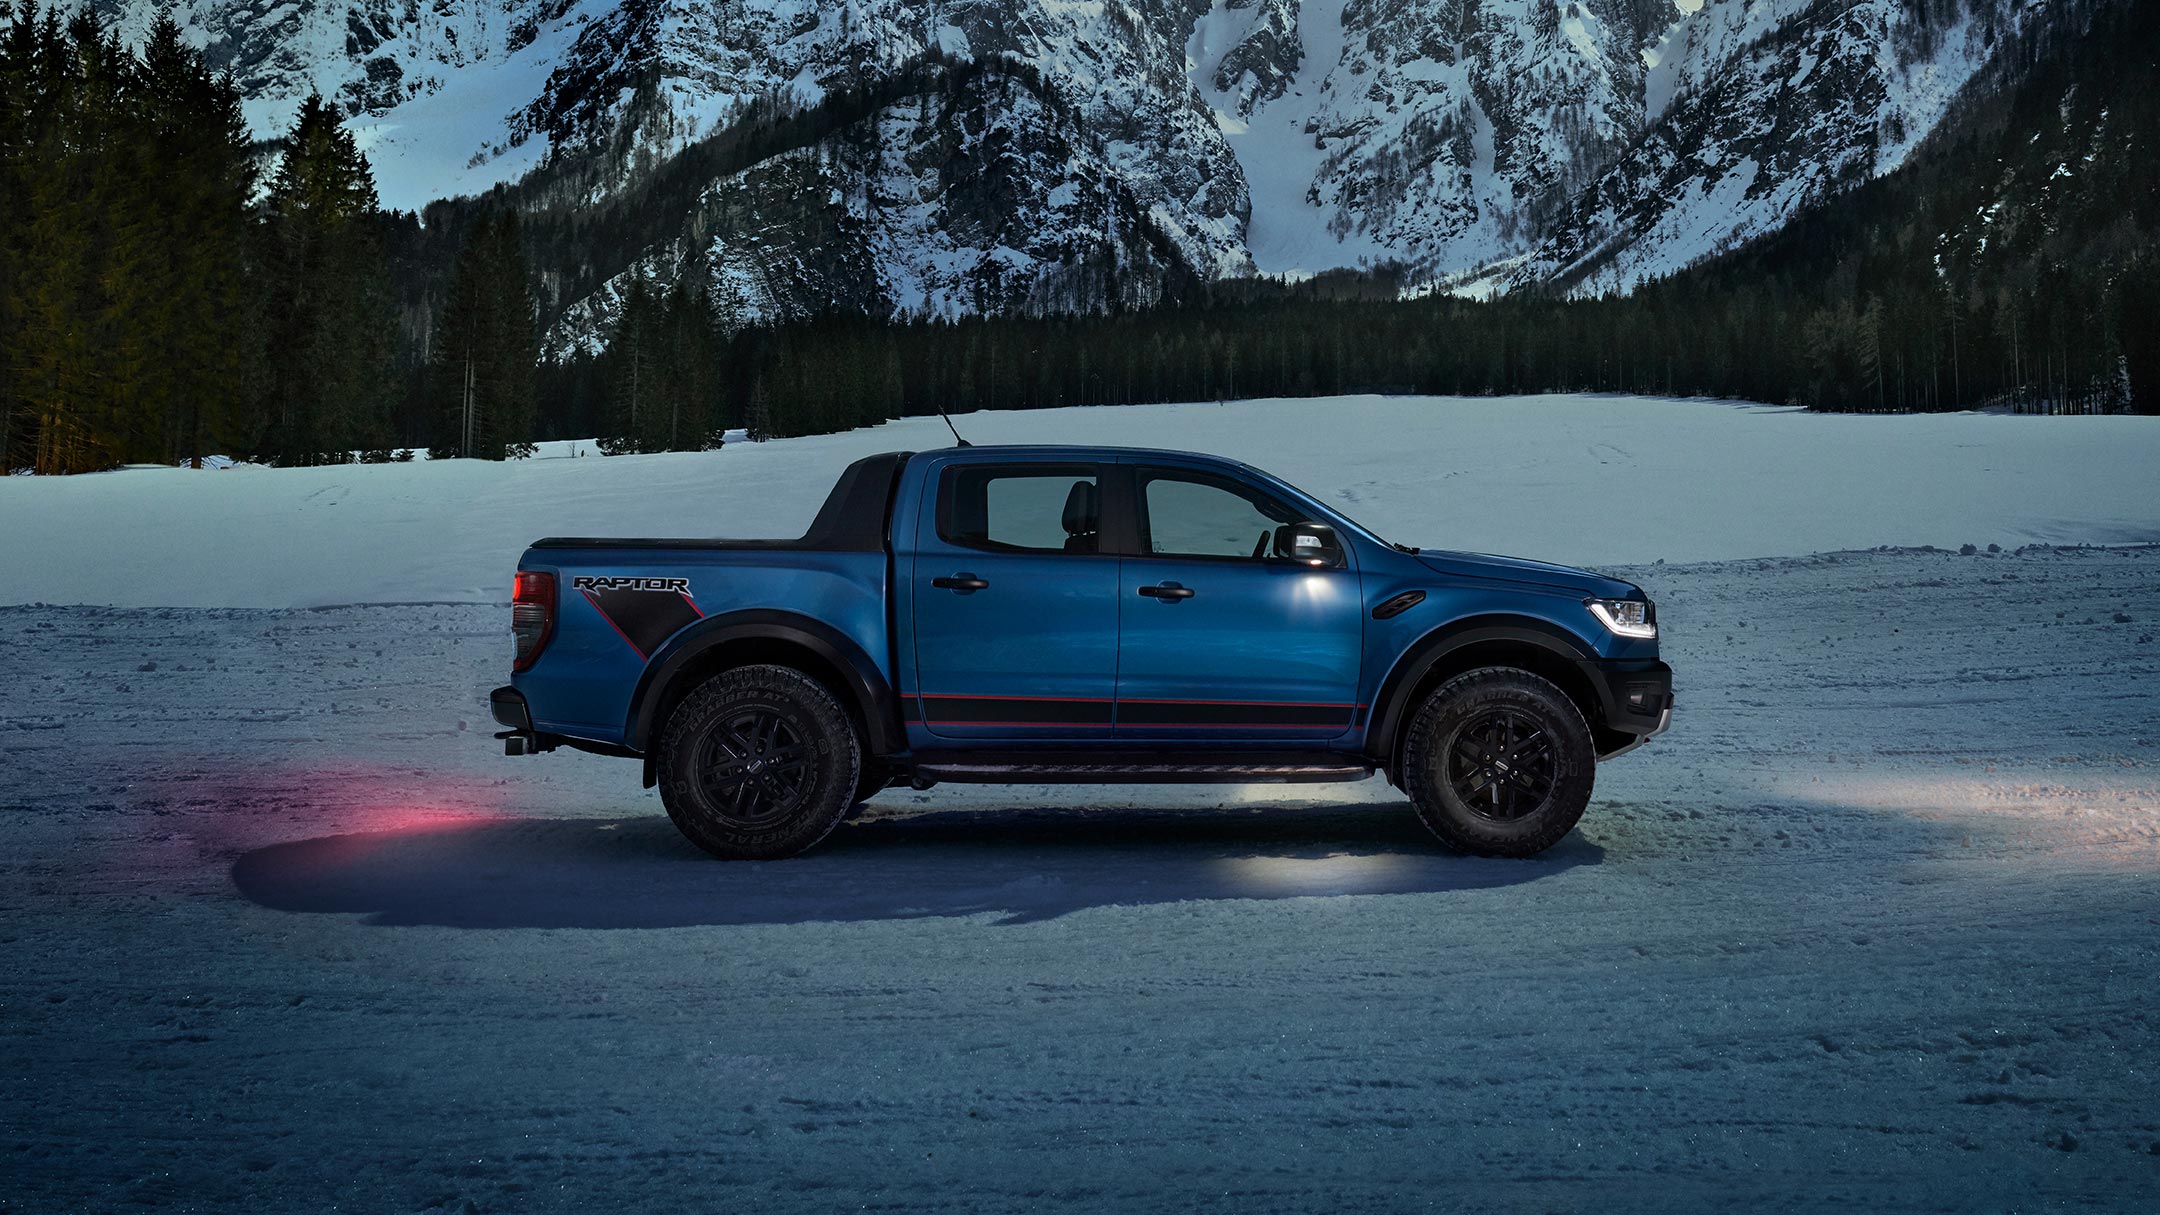 Ford Ranger Raptor Special Edition profile view